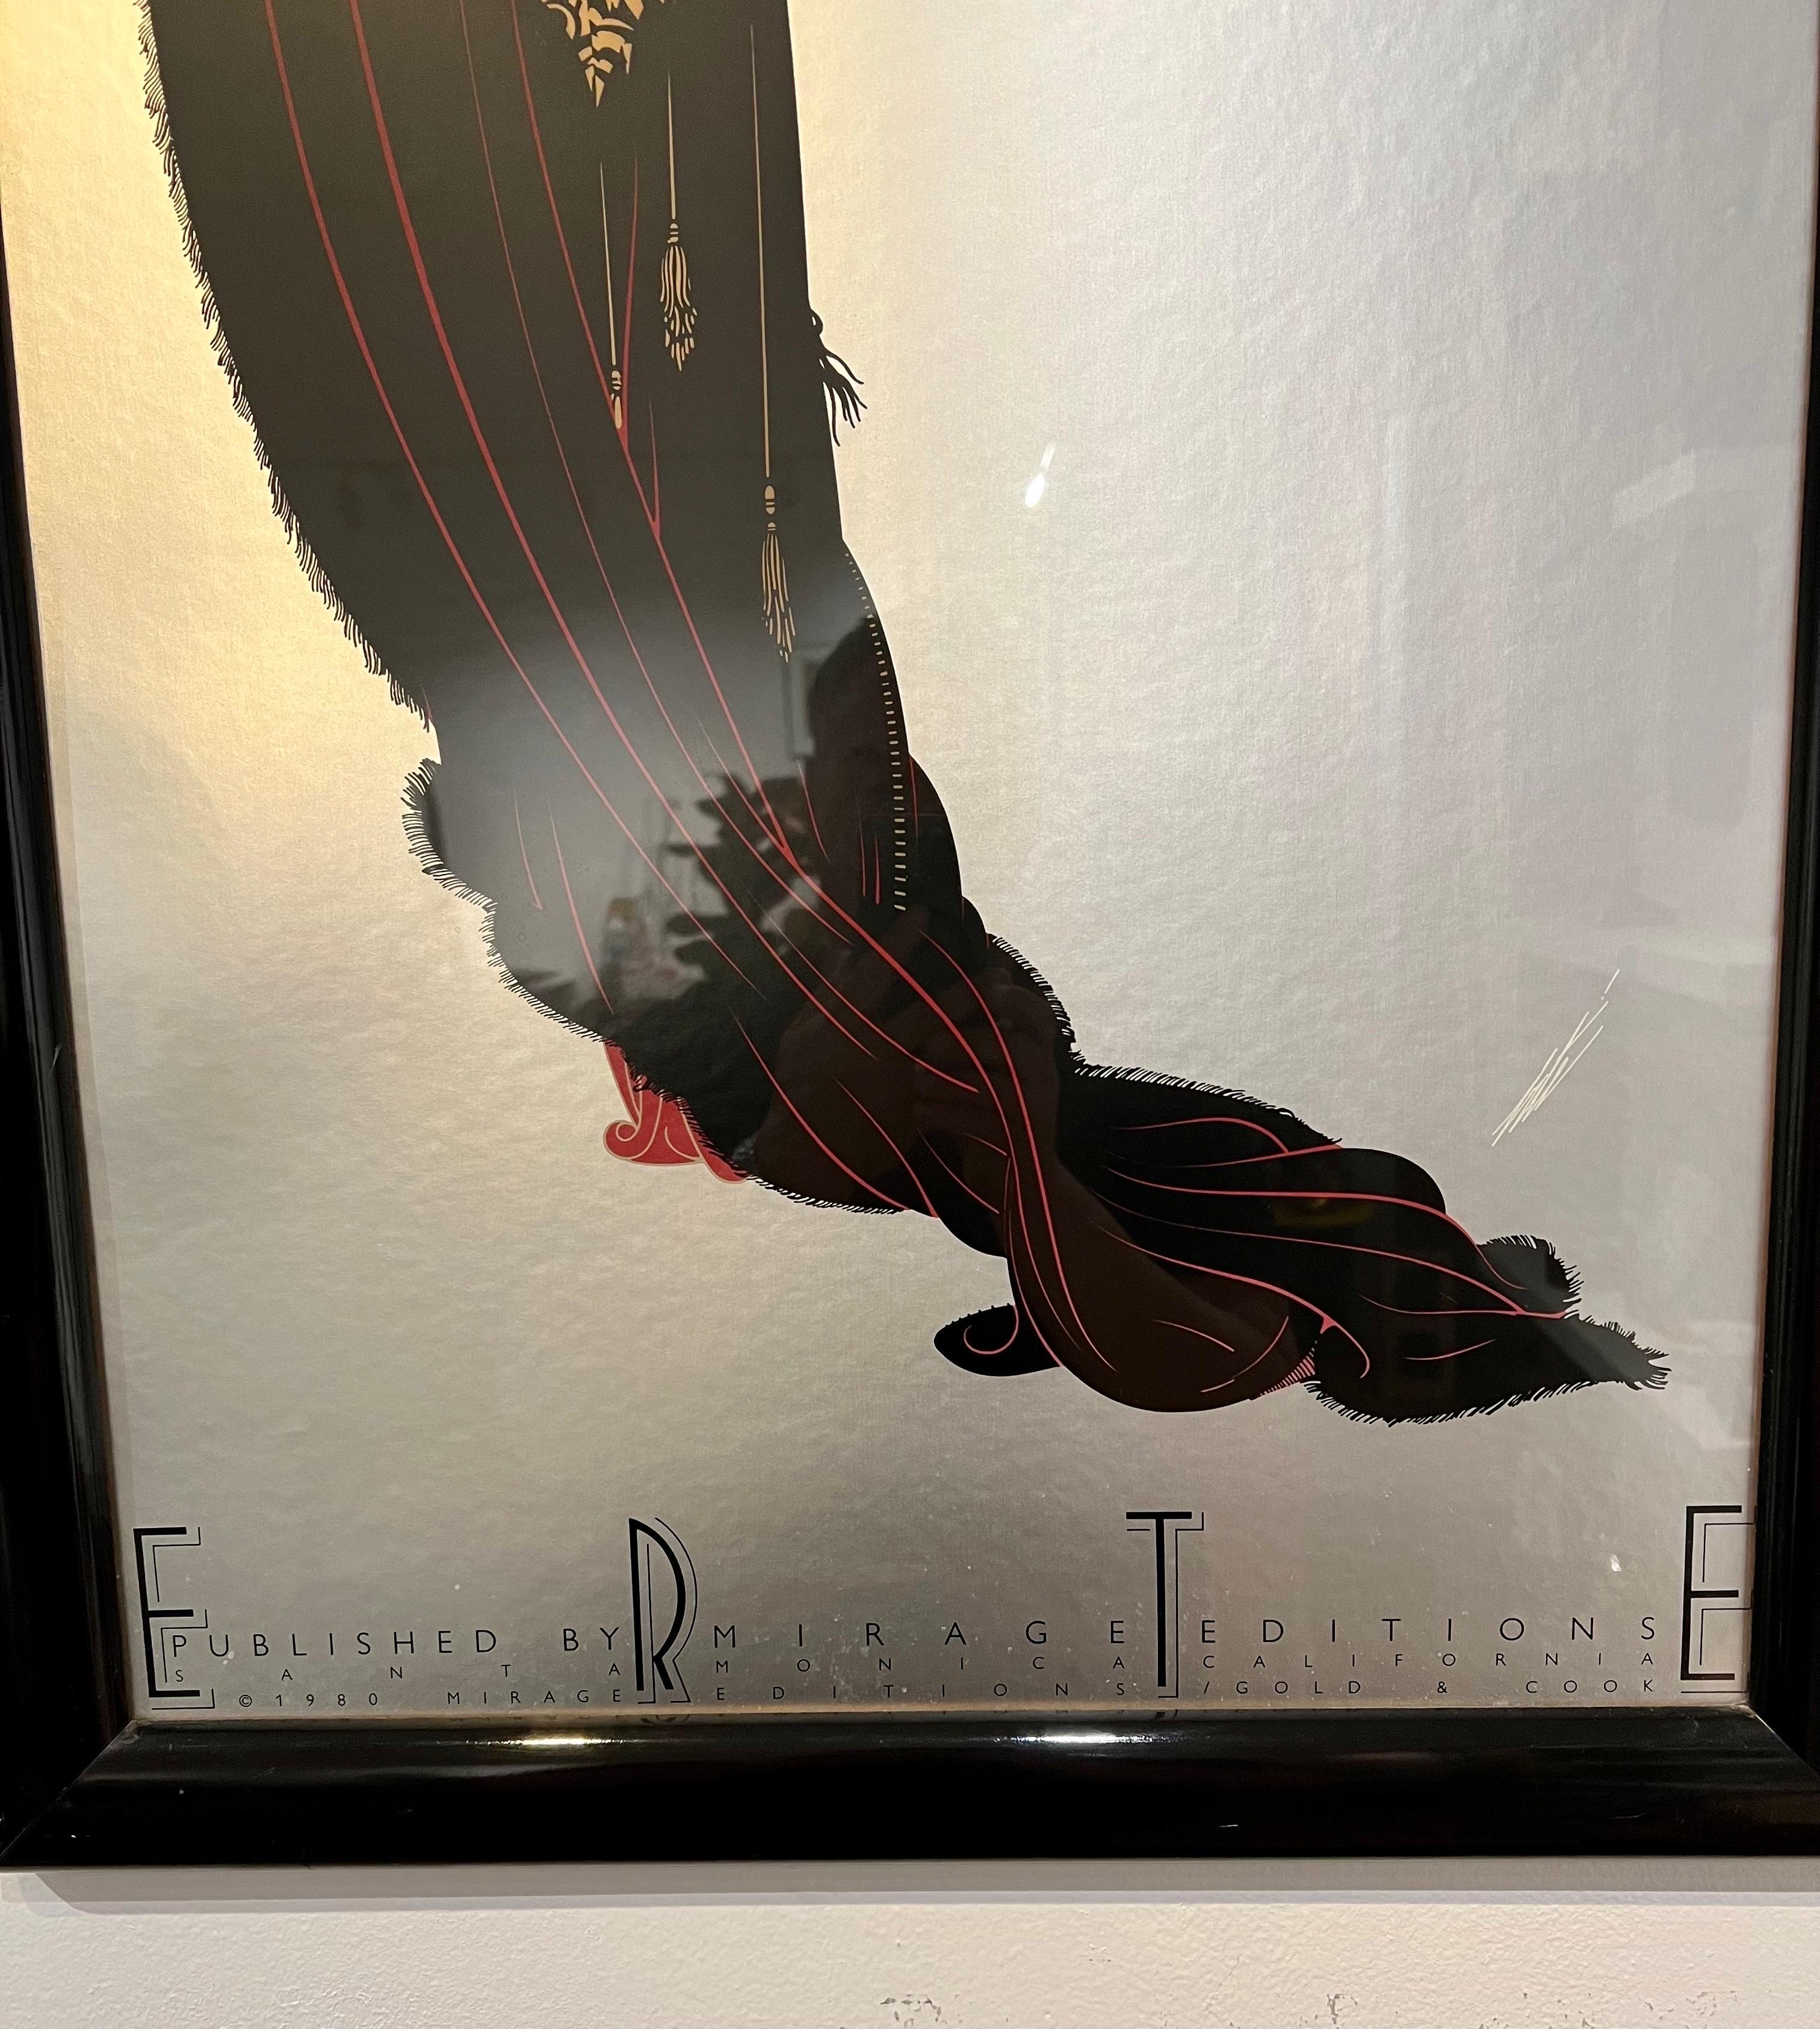 Framed exhibition collectible poster by Mirage Editions for Santa Monica California, circa 1980 nice clean condition framed with black glossy frame edge and glass. Printed on silver paper the frame shows a chip repair on the top corner invisible to